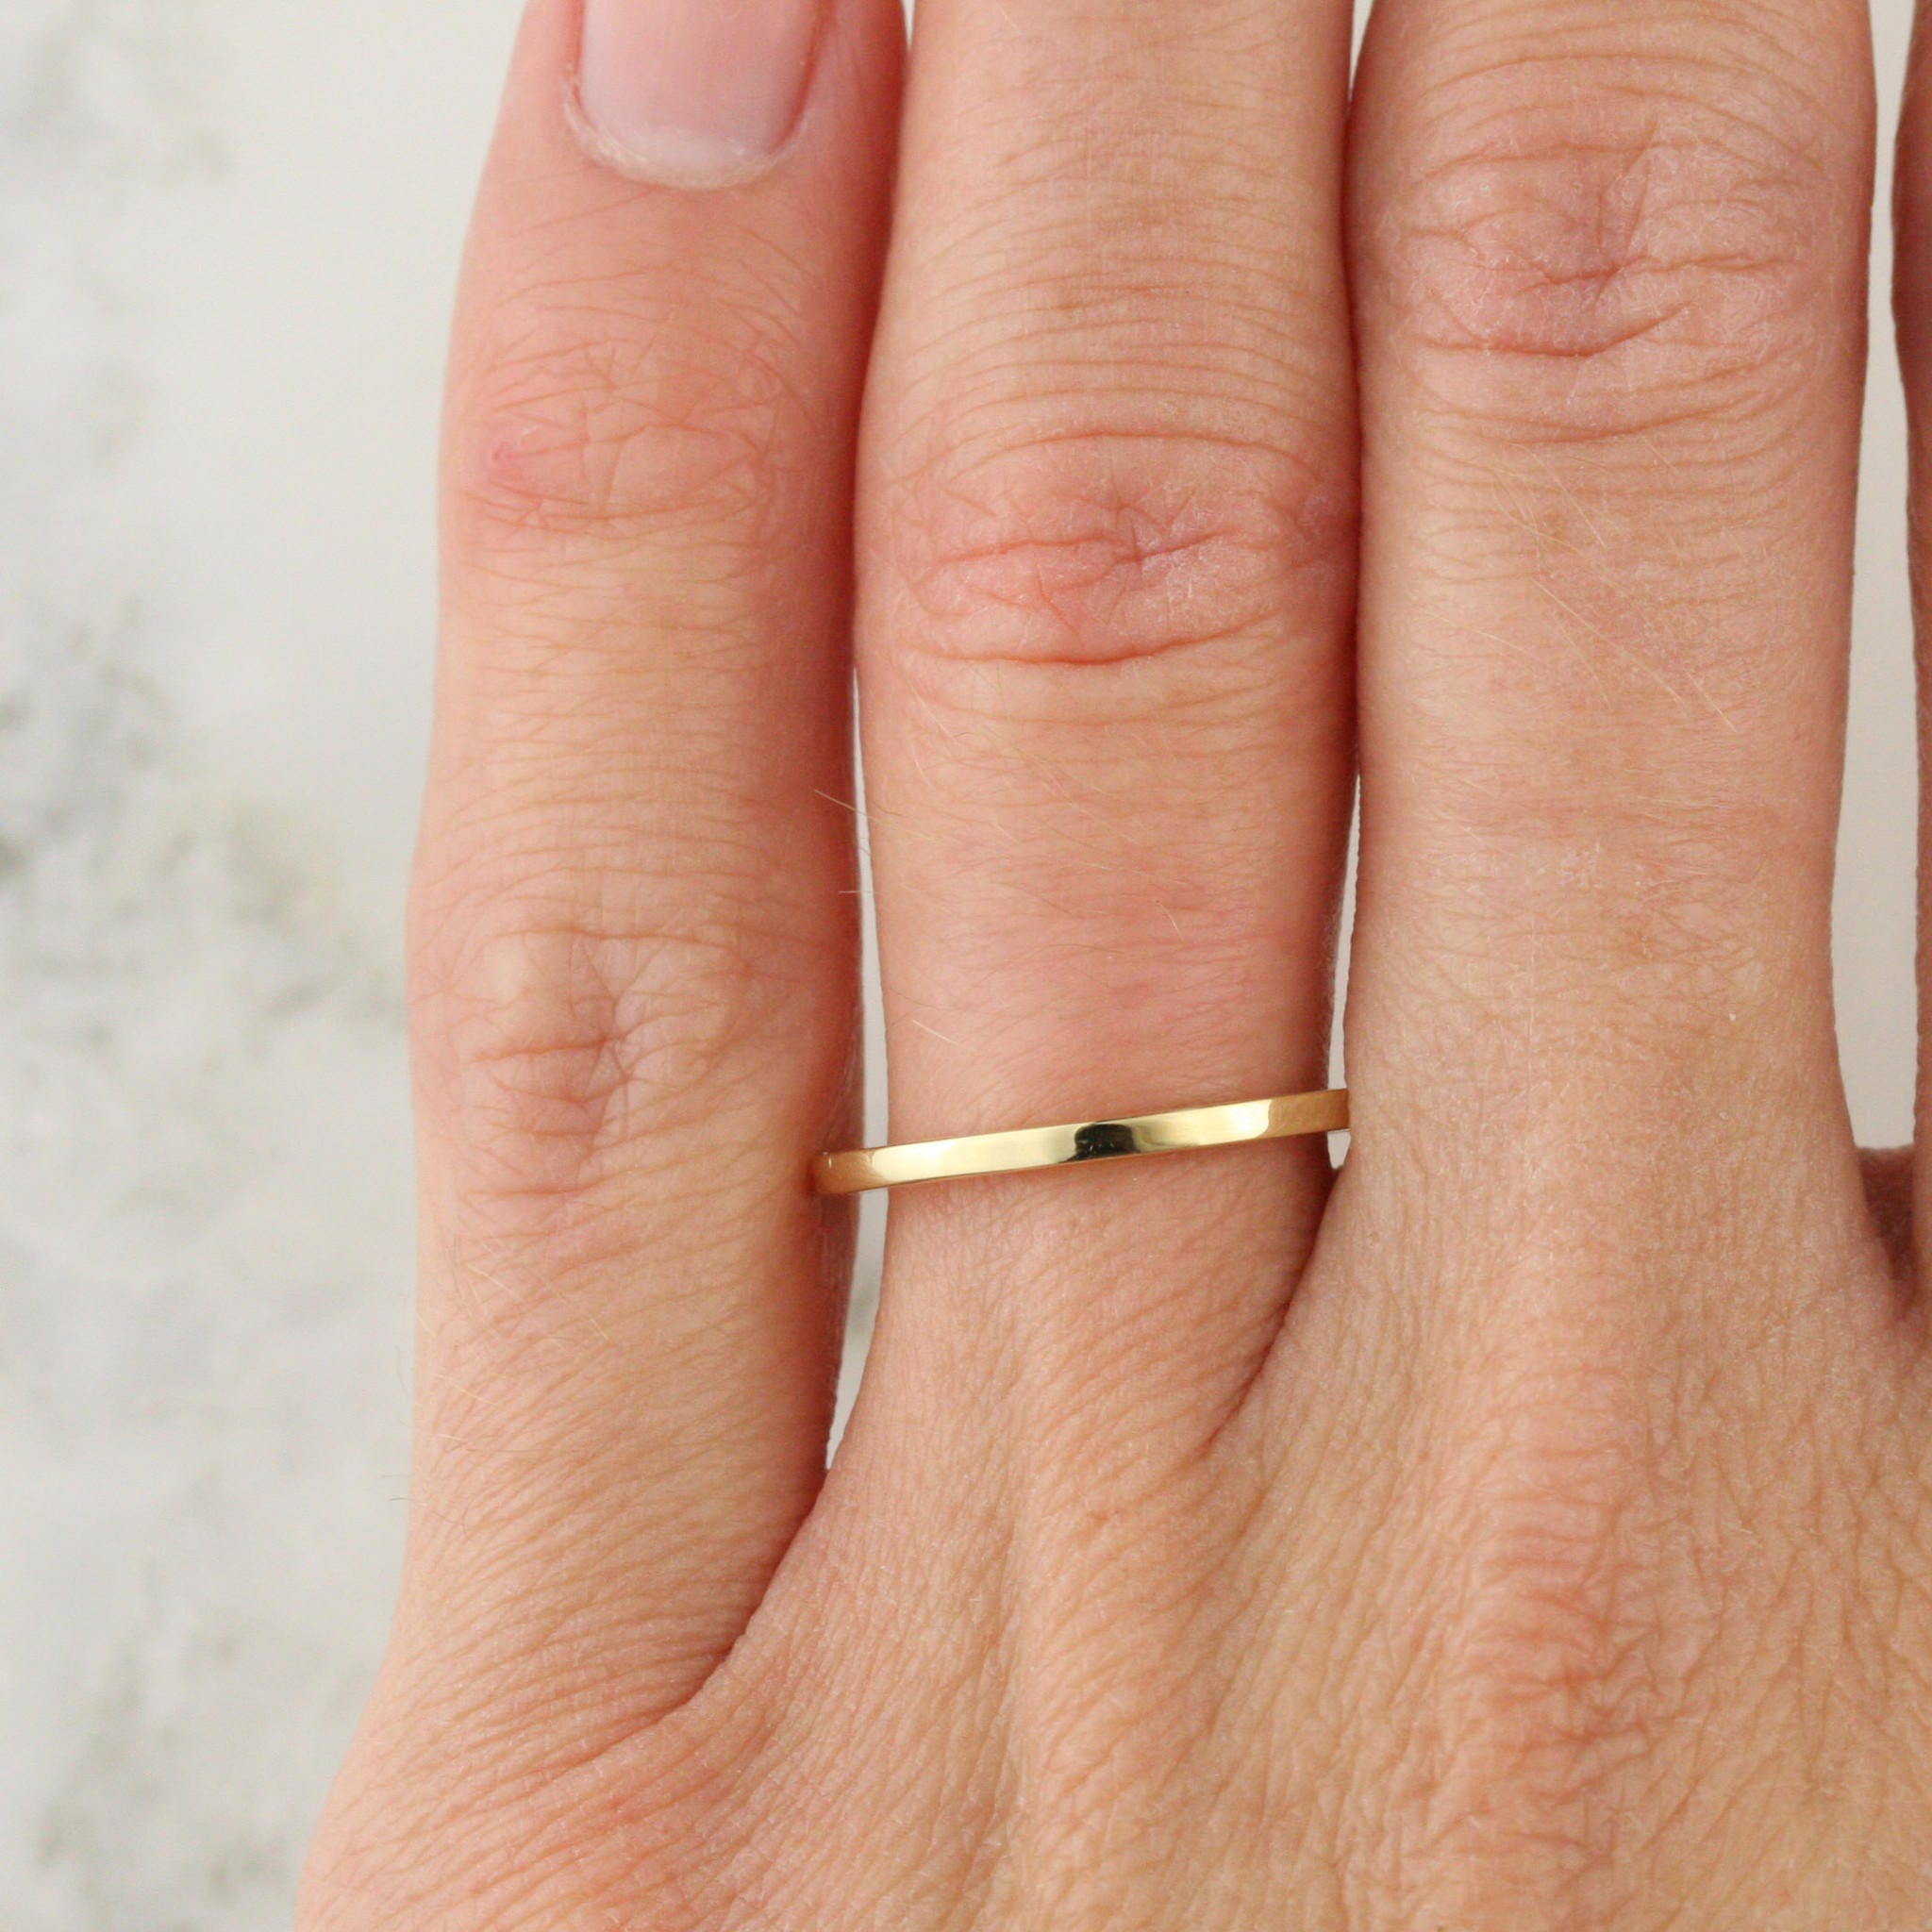 Gold Ring with Edges Gold Edge Ring Thin Gold Stacking Ring Minimal Ring Everyday Jewelry Gift for her Square Edge Stacking Ring Band